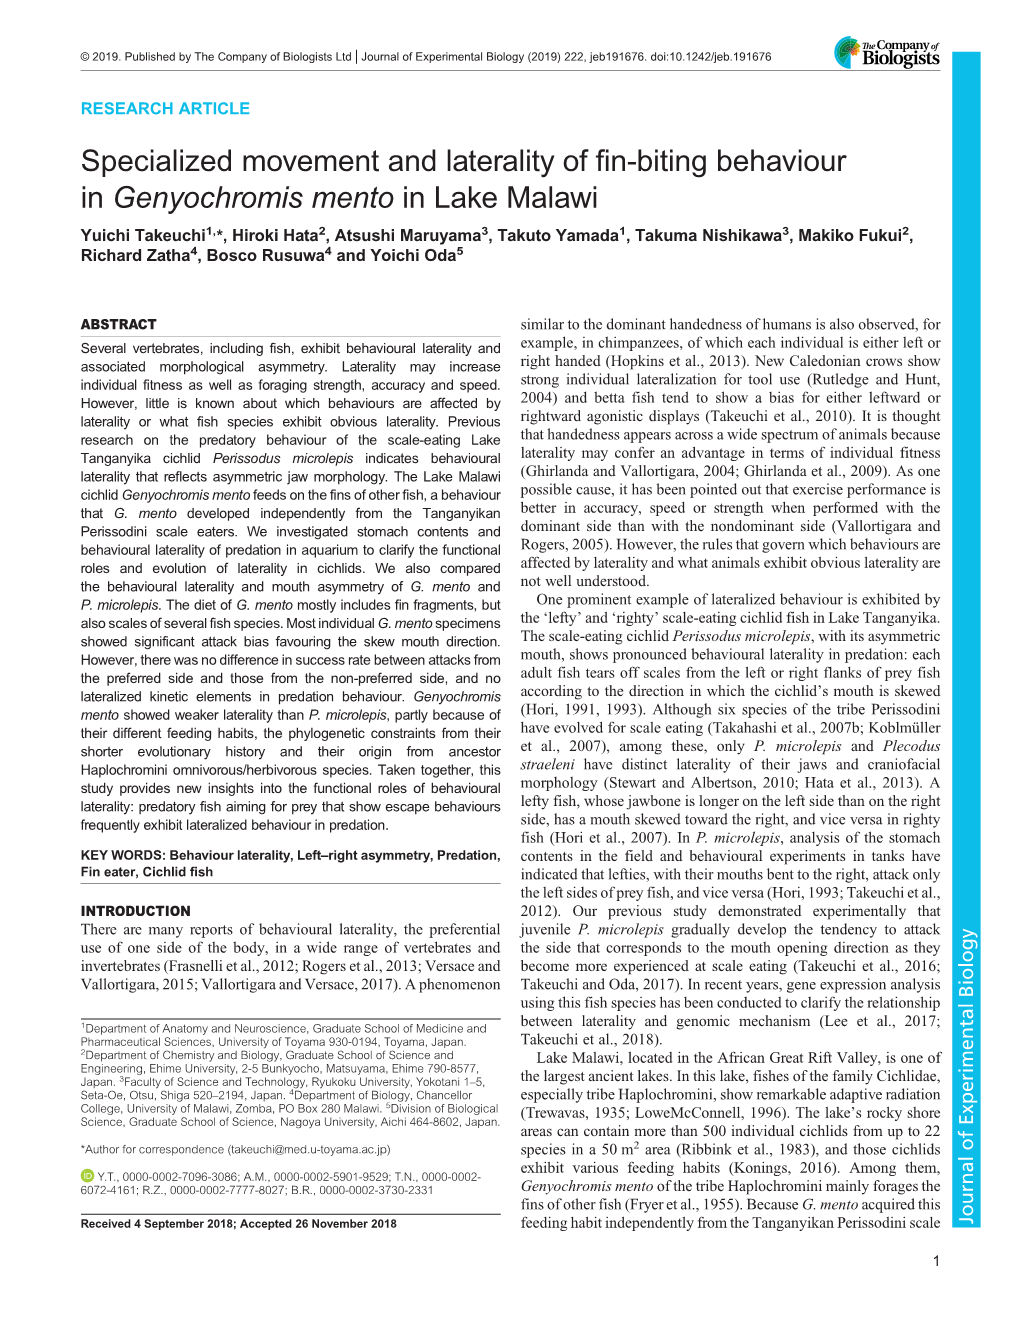 Specialized Movement and Laterality of Fin-Biting Behaviour in Genyochromis Mento in Lake Malawi